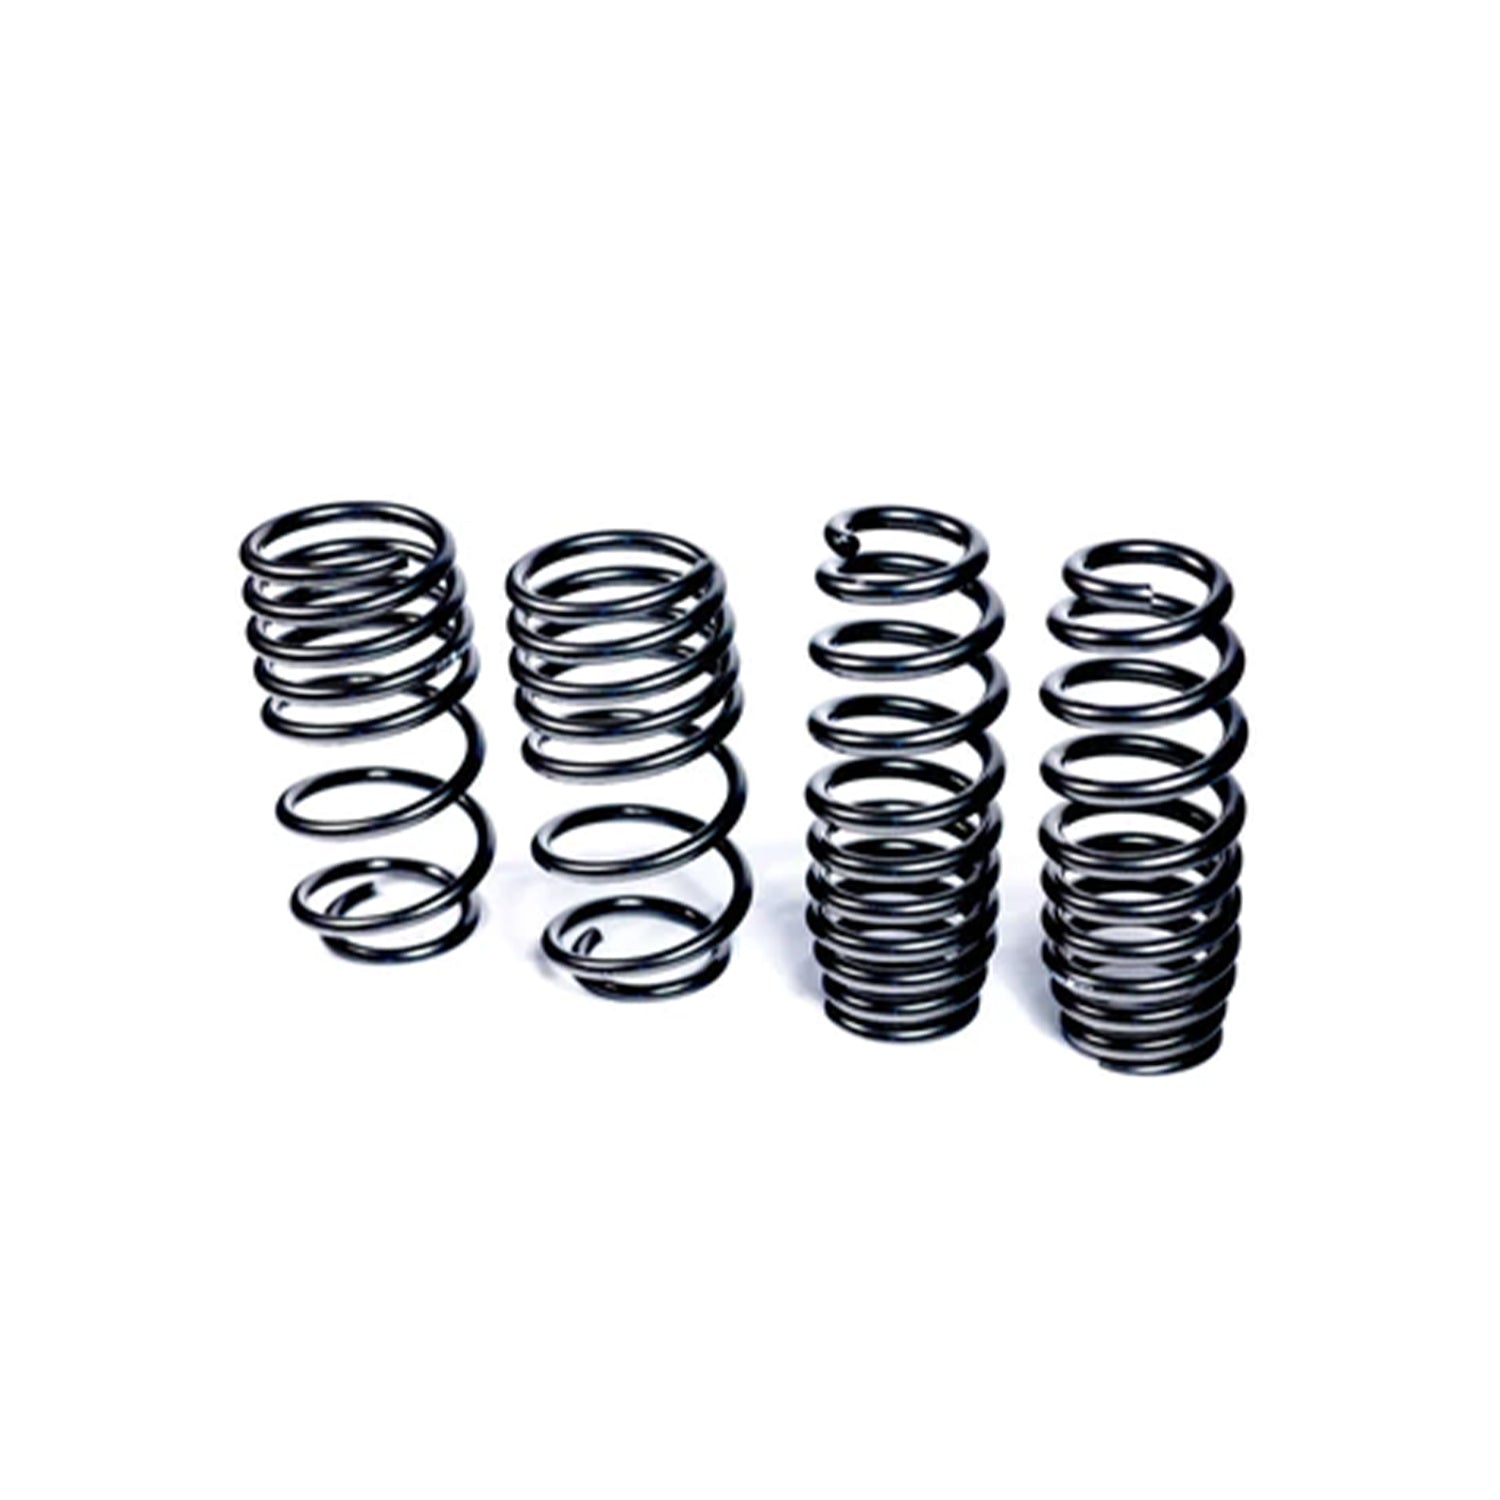 MMR BMW G82 M4 Lowering Springs (30mm Lower Ride Height) - R44 Performance